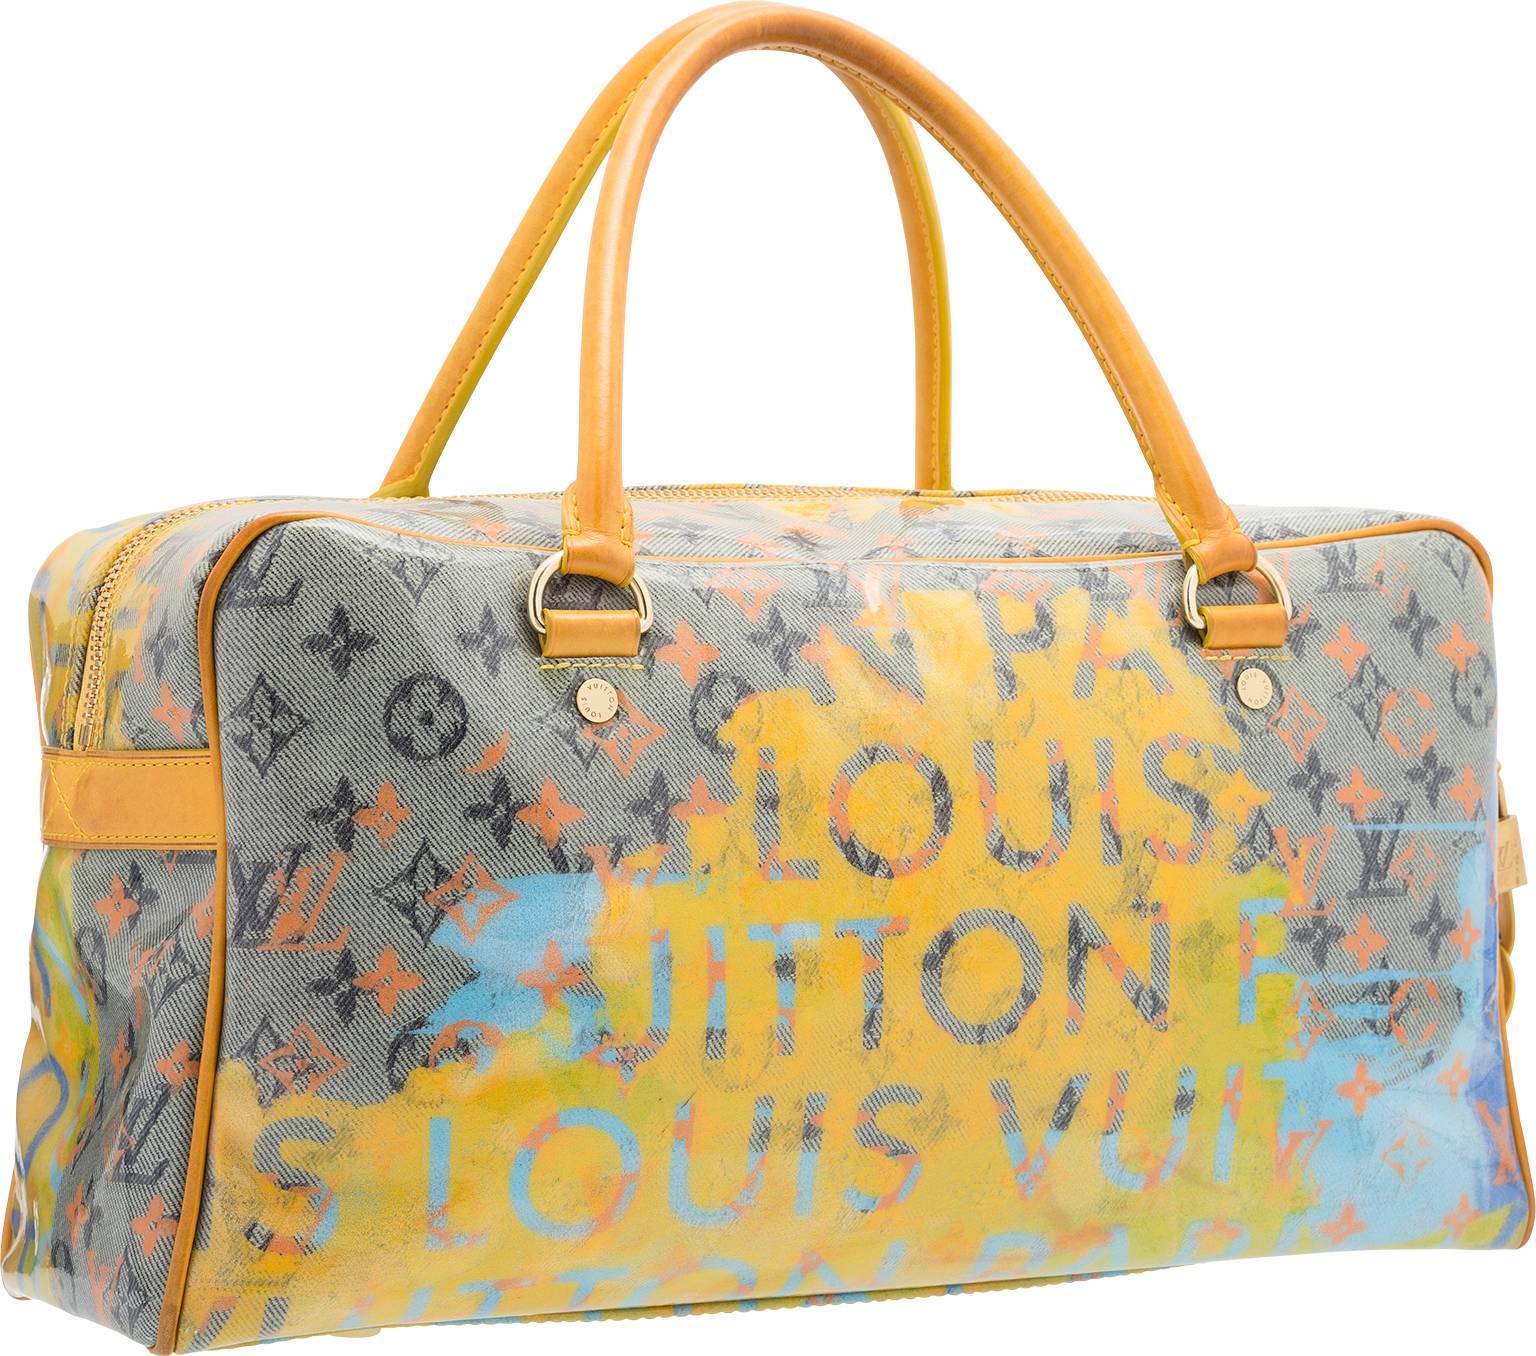 This Limited Edition 2008 Louis Vuitton bag was designed in a collaboration between Marc Jacobs and Richard Prince. This important piece is at the same time recognizably Richard Prince, Marc Jacobs, and Louis Vuitton. The Jaune version of the Defile